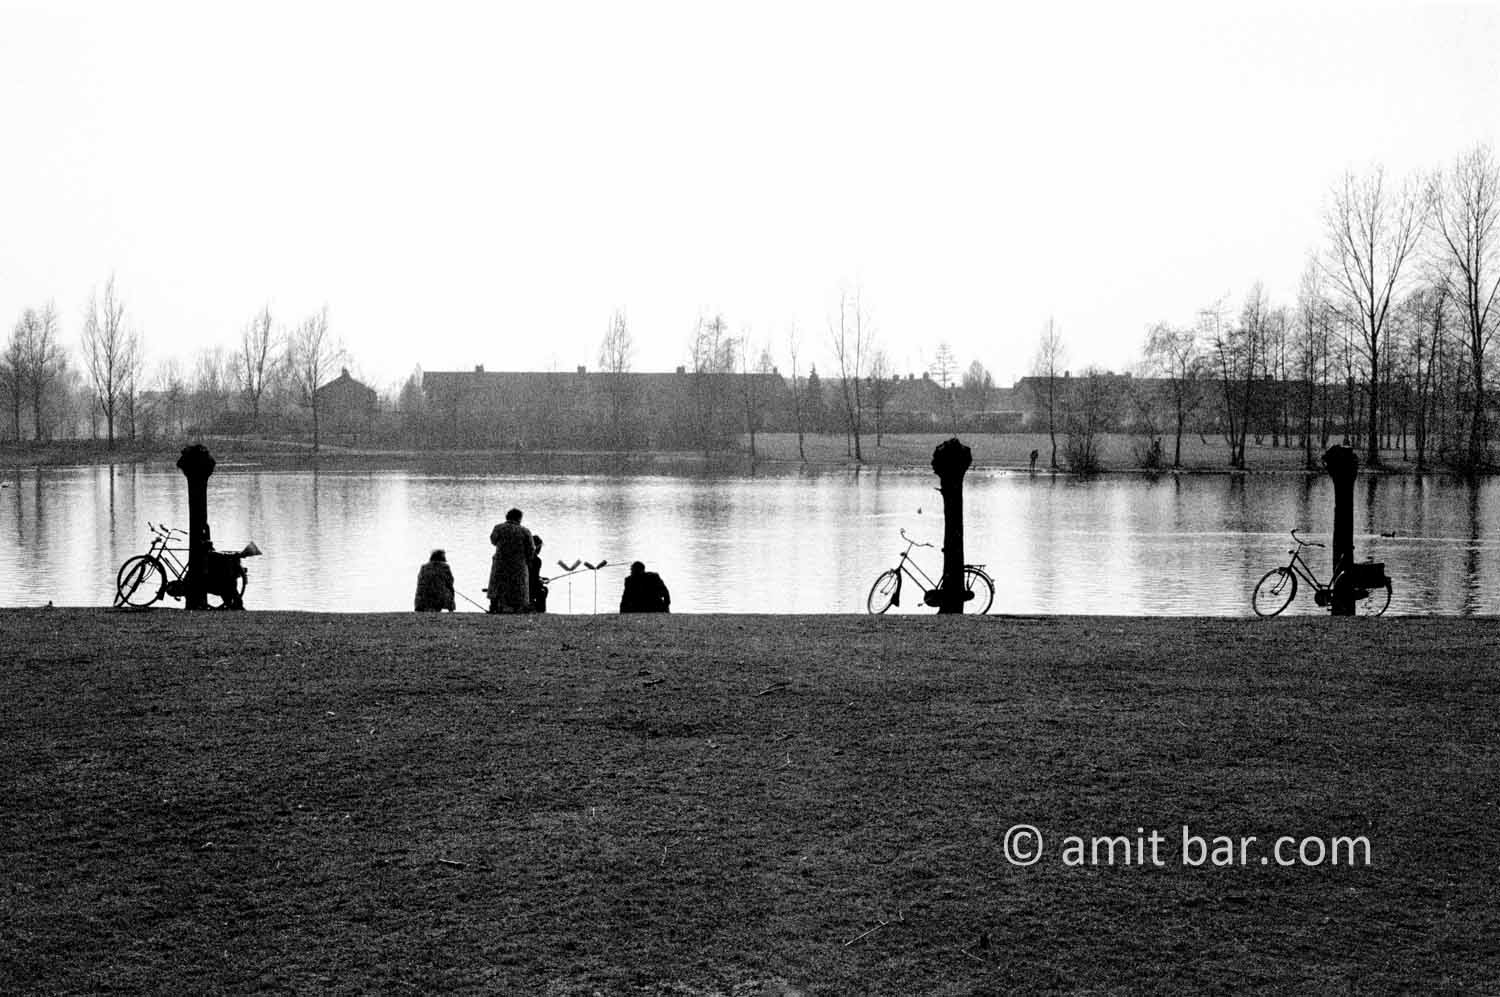 Willows, bikes, fishermen and reflections: Fishermen at a lake in Doetinchem